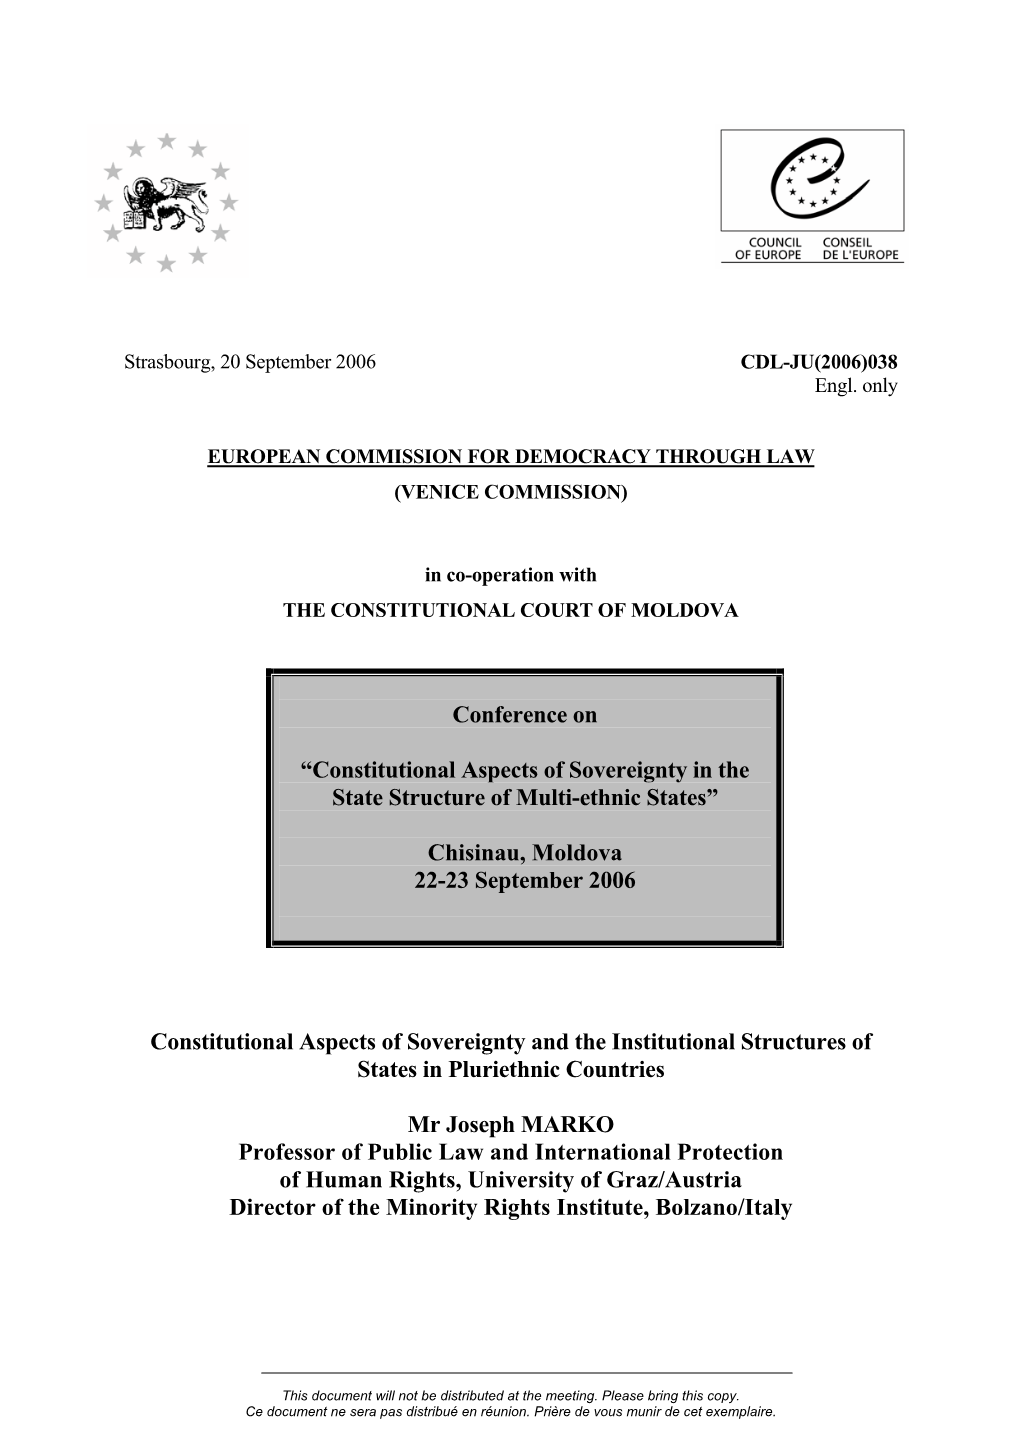 Constitutional Aspects of Sovereignty in the State Structure of Multi-Ethnic States”